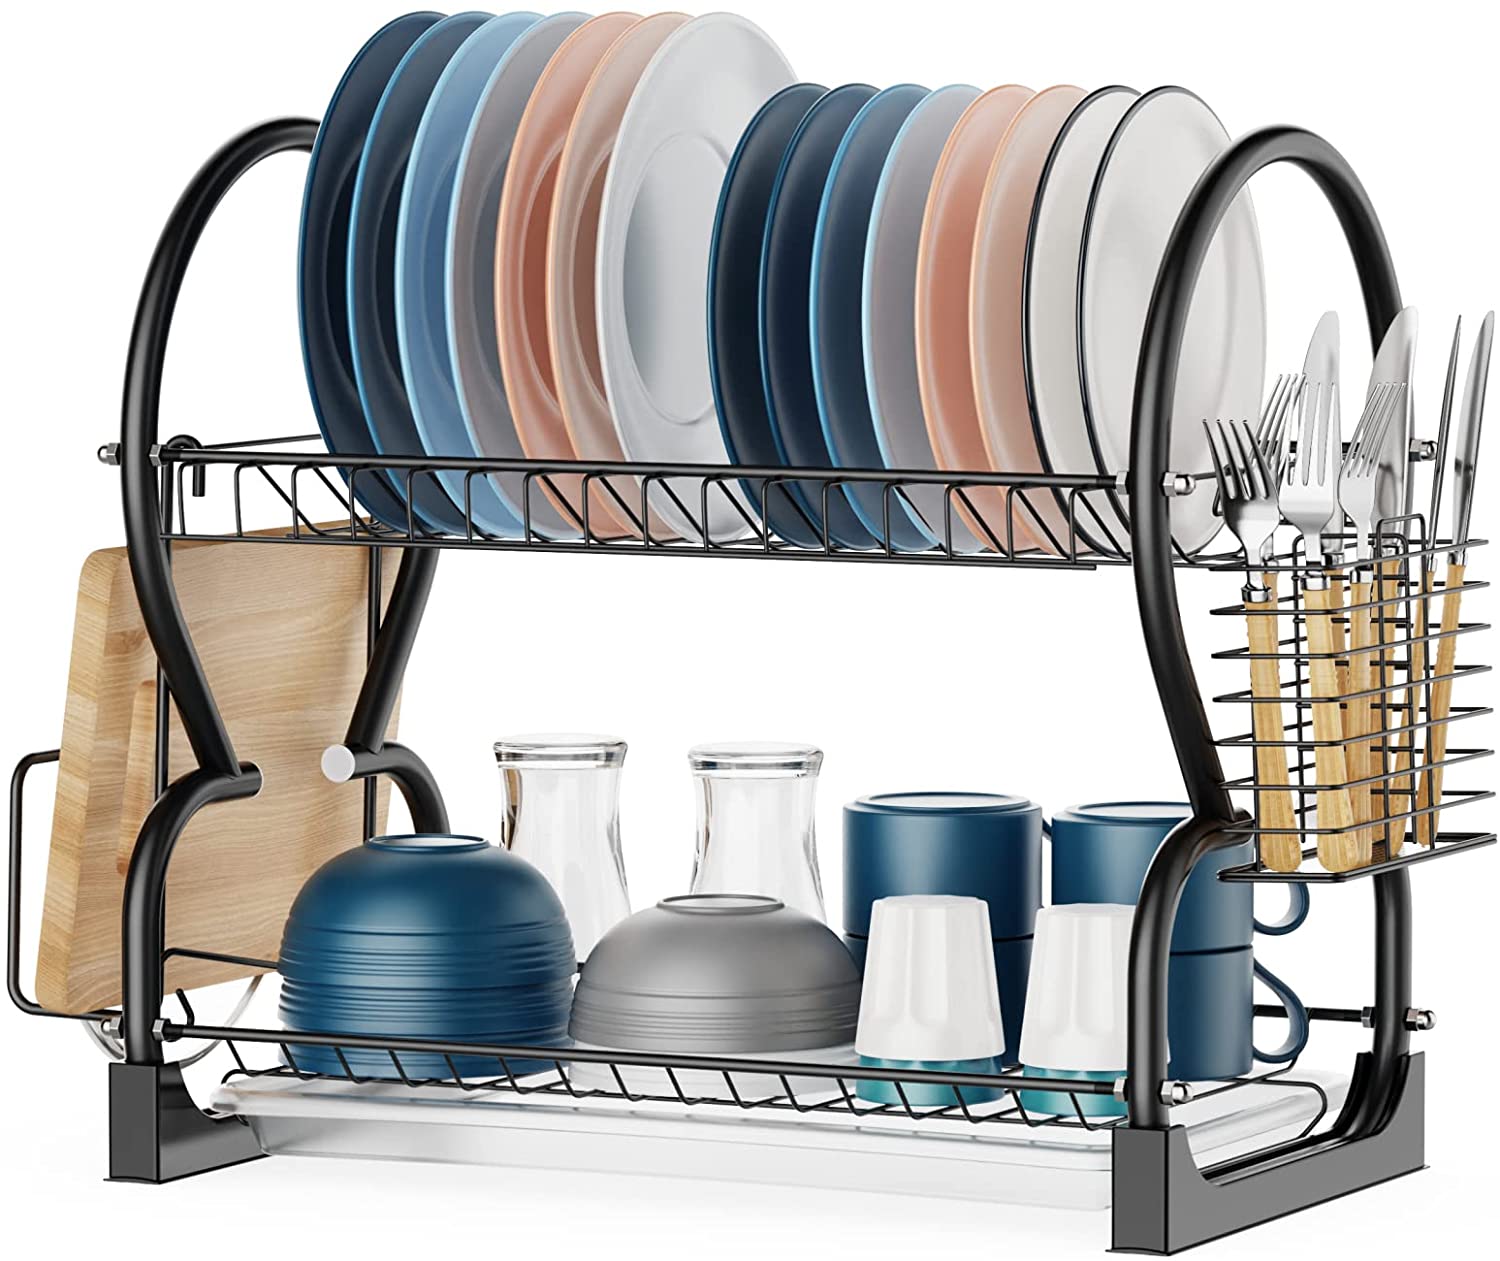 Dish Drying Rack, GSlife 2 Tier Stainless Steel Dish Rack with Utensil Holder, Cutting Board Holder and Dish Drainer for Kitchen Counter, Black.